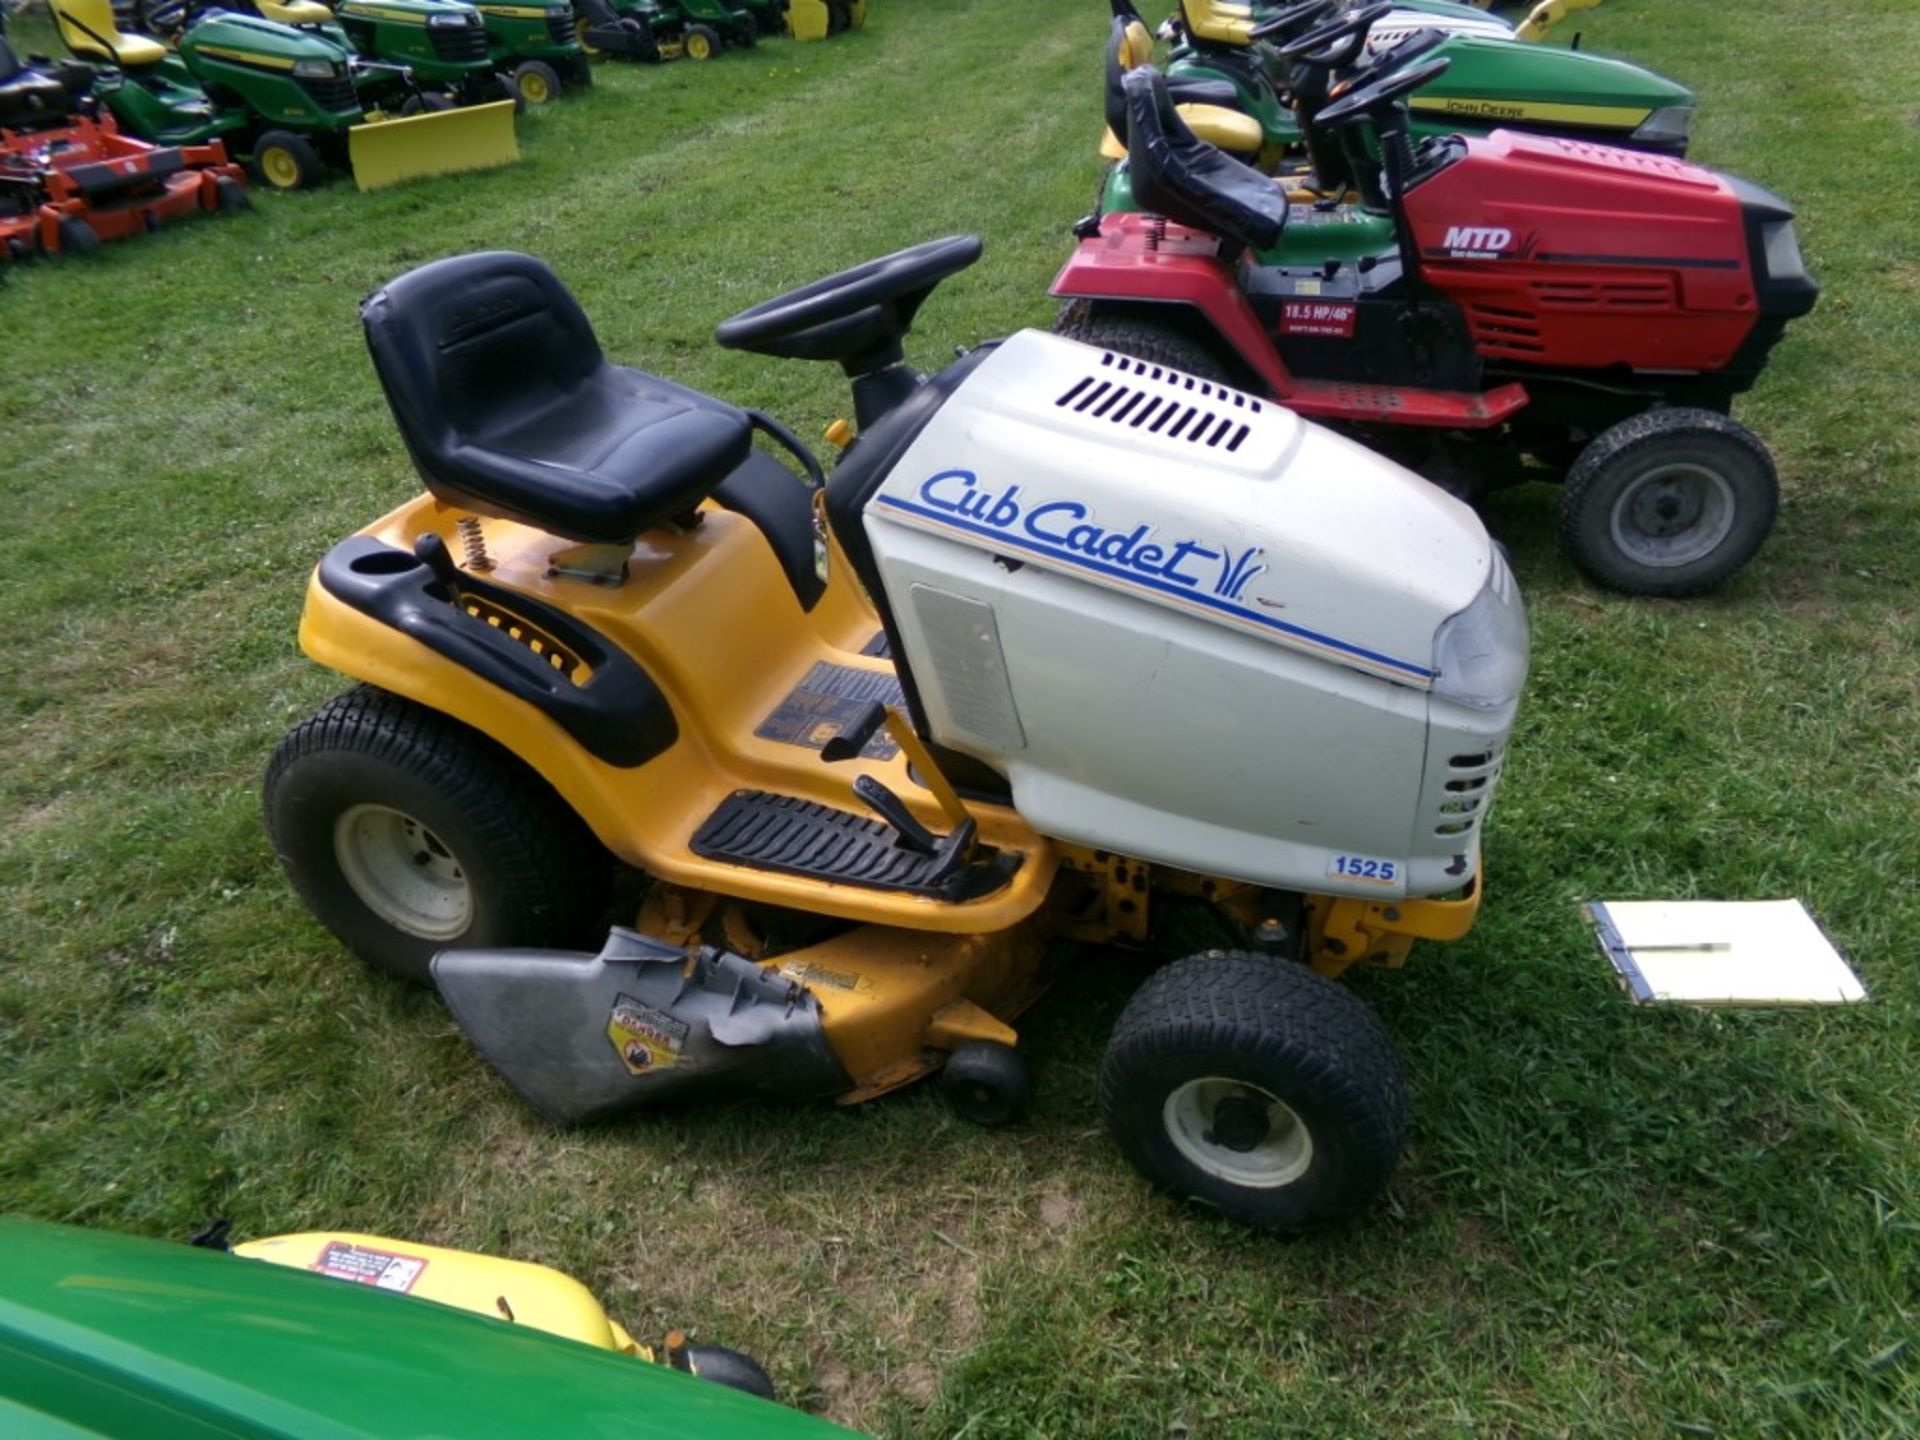 Cub cadet 1525 with 42'' Deck and 15 HP Engine, 510 Hrs., Ser. # H10384 (5320) - Image 2 of 2